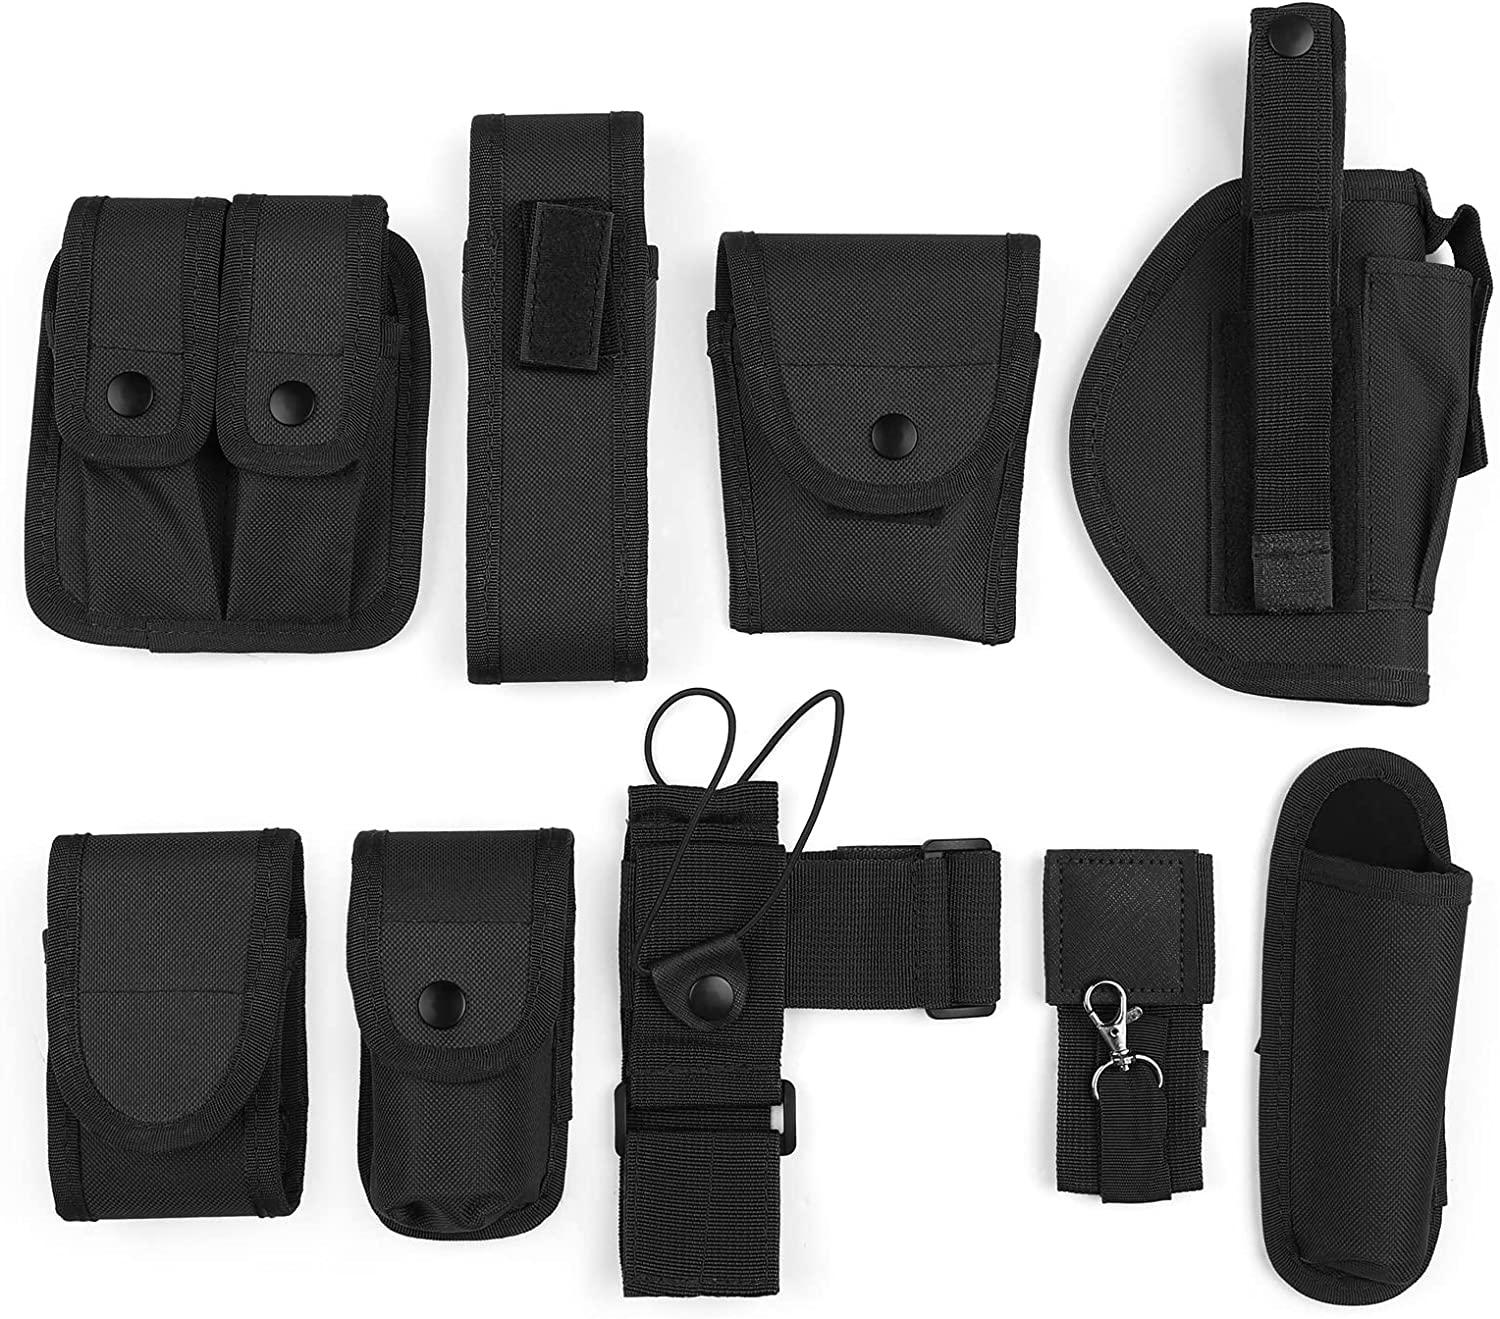 Lixada Duty Belt Modular Equipment System Security Utility Duty Belt with  Components Pouches Bags Holster Gear for Law Enforcement Guard Security  Hunting 10PCS 10pcs Kit Black